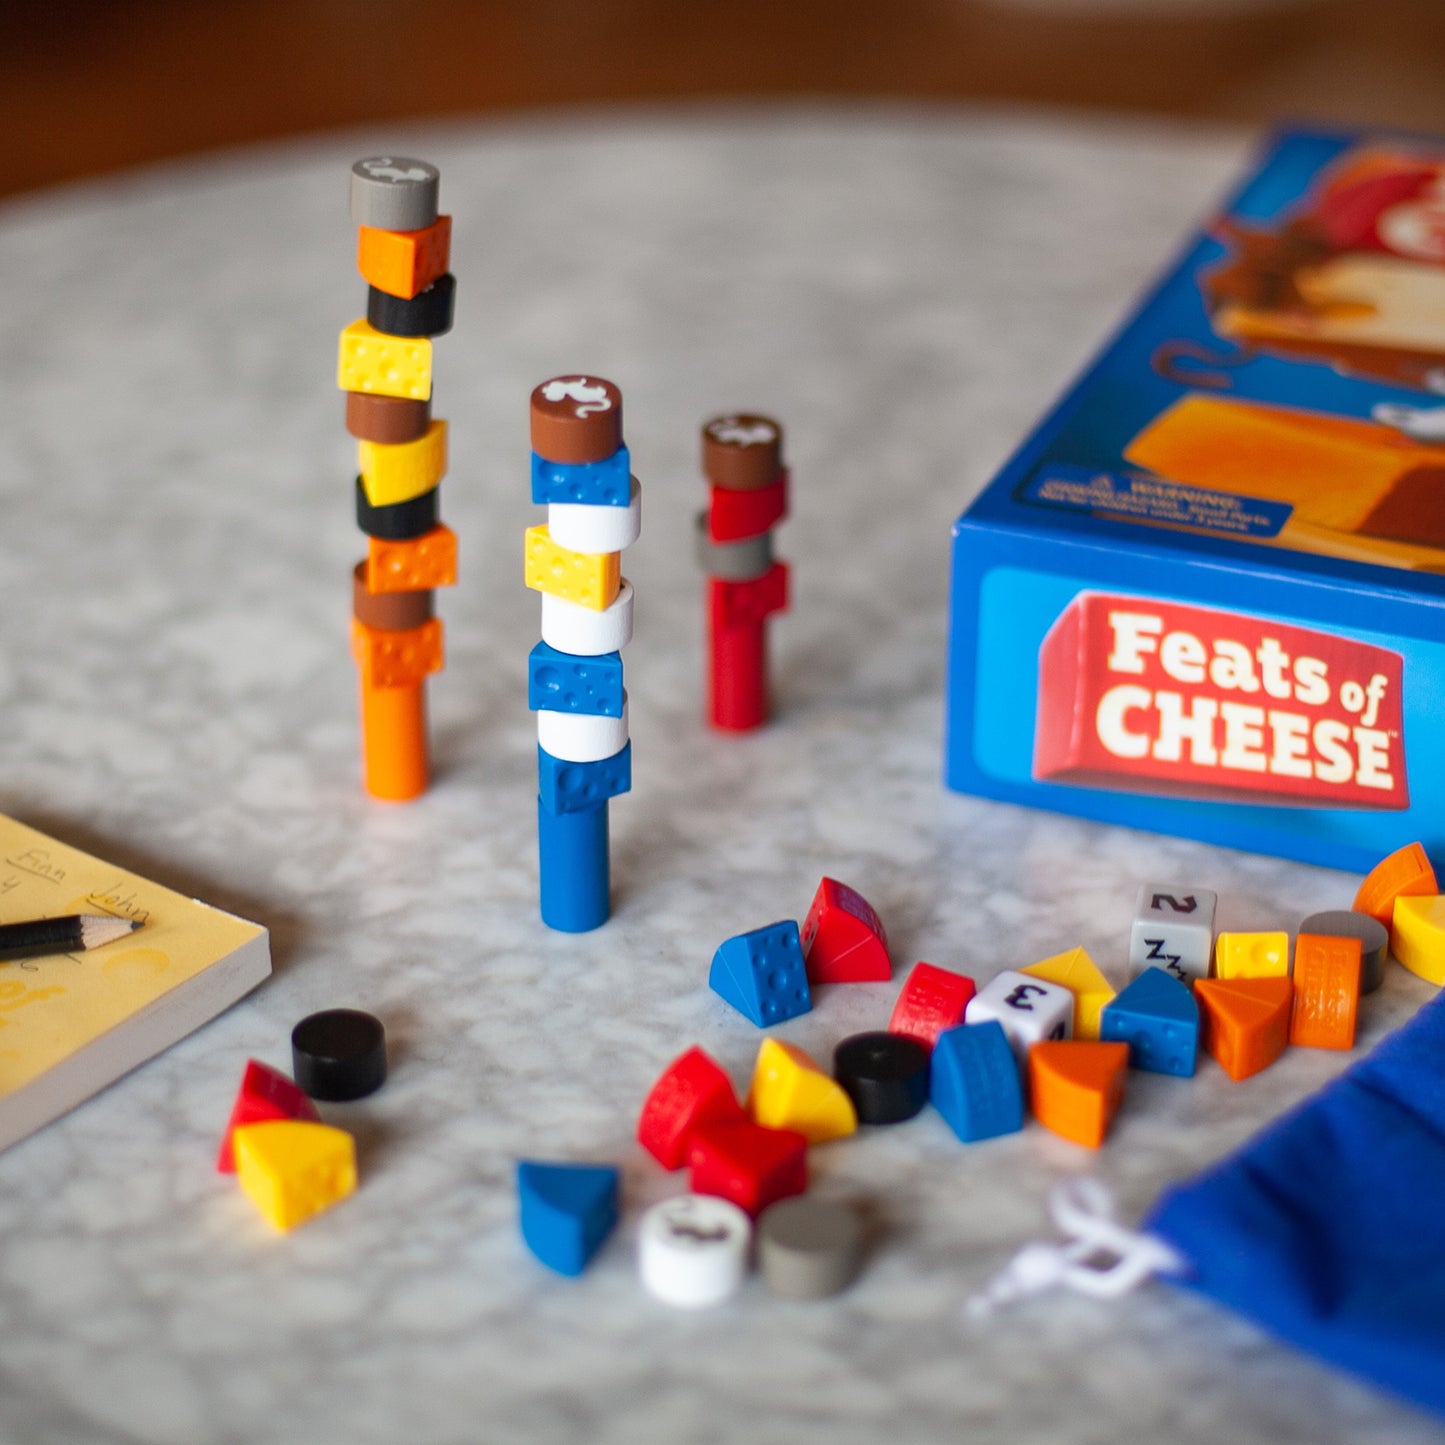 Feats of Cheese by SimplyFun is a fun physics game for ages 7 and up.